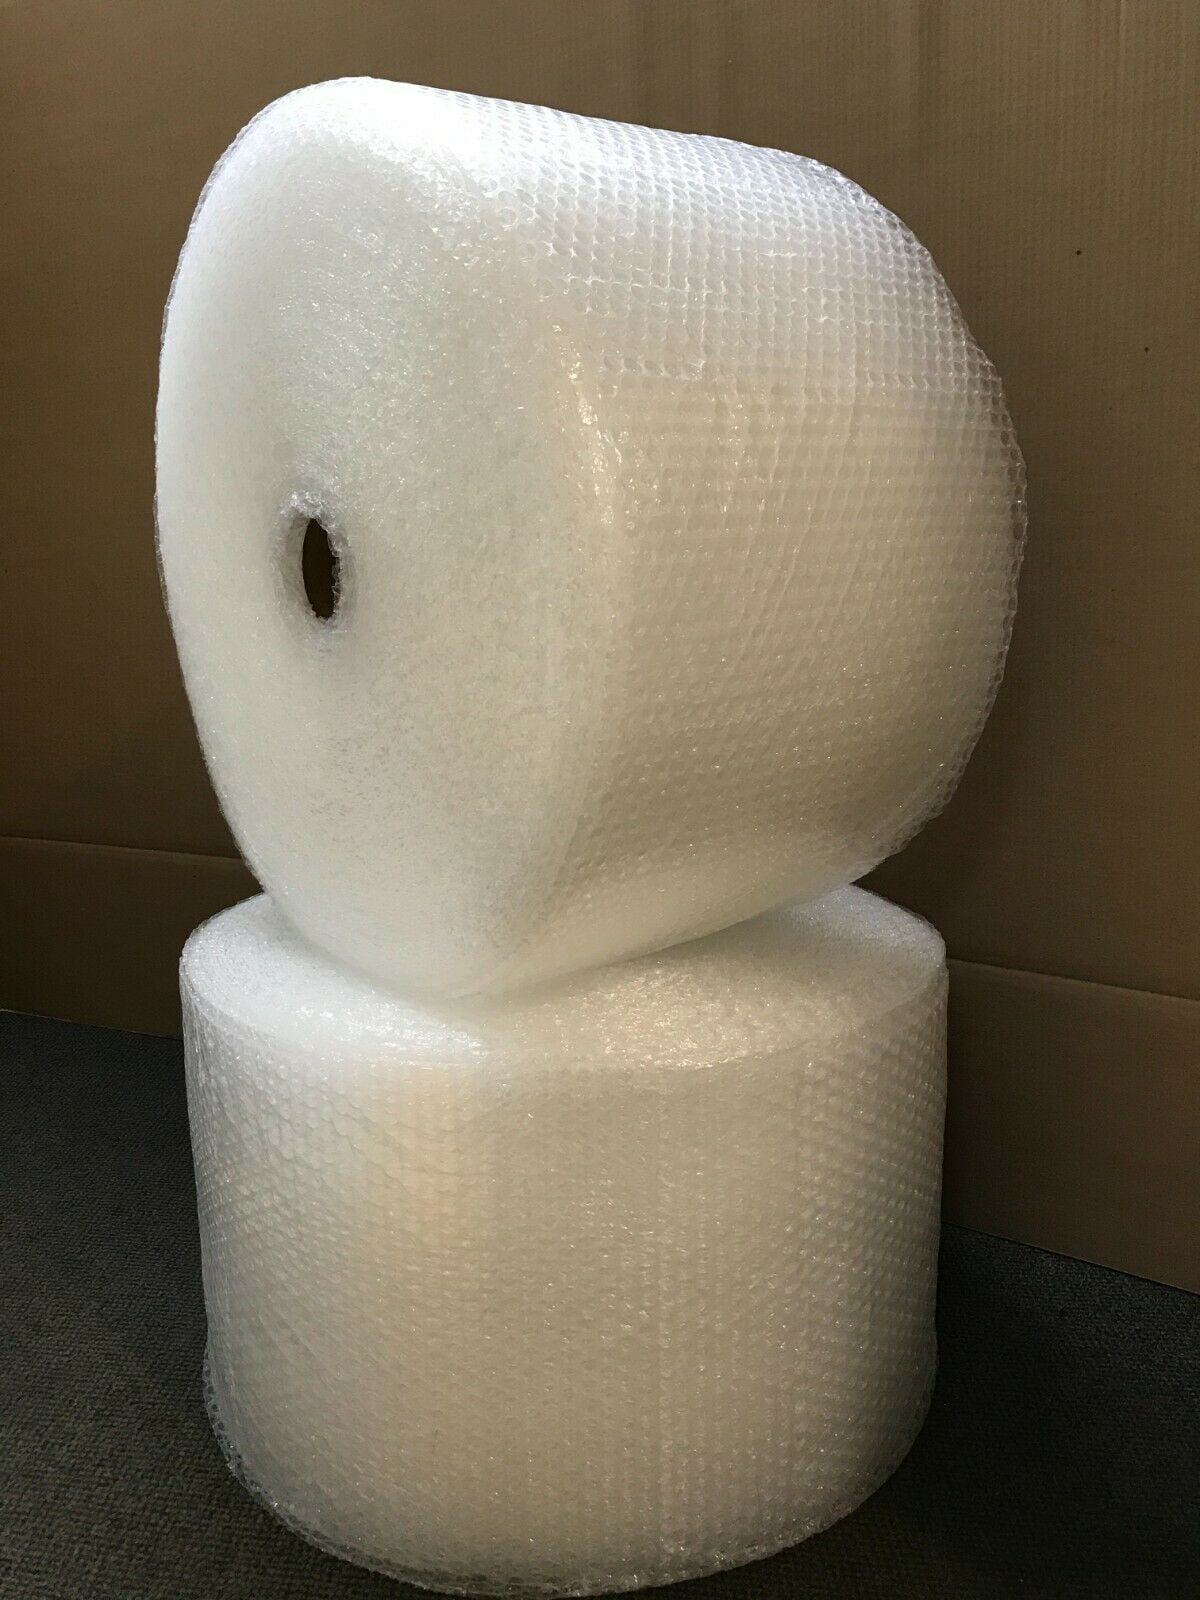 3/16" WP Small Bubble Cushioning Wrap Padding Roll 350' x 24" Wide 350FT 